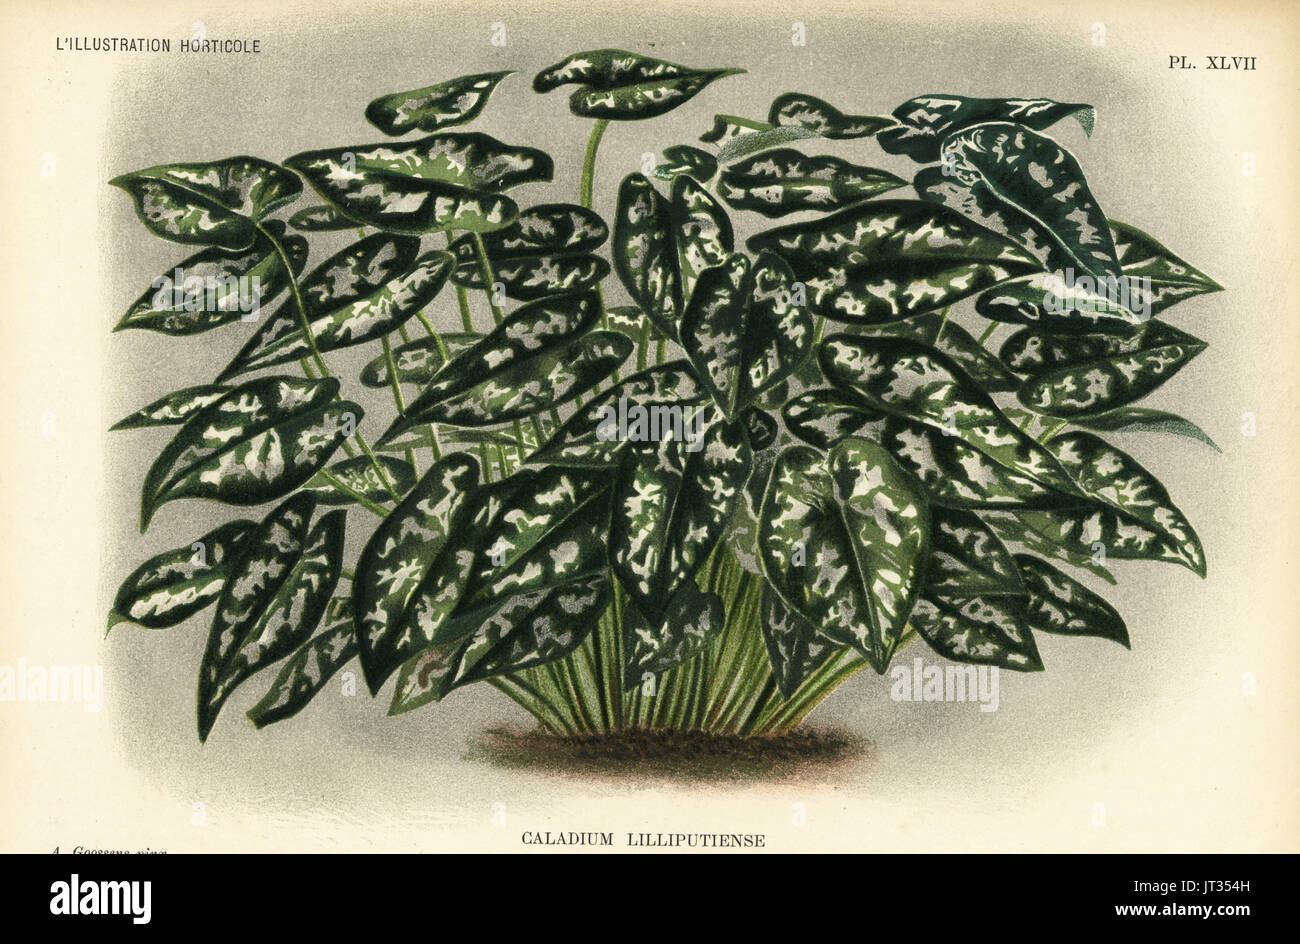 Elephant ear species, Caladium lilliputiense. Chromolithograph by Pieter de Pannemaeker after an illustration by A. Goossens from Jean Linden's l'Illustration Horticole, Brussels, 1895. Stock Photo